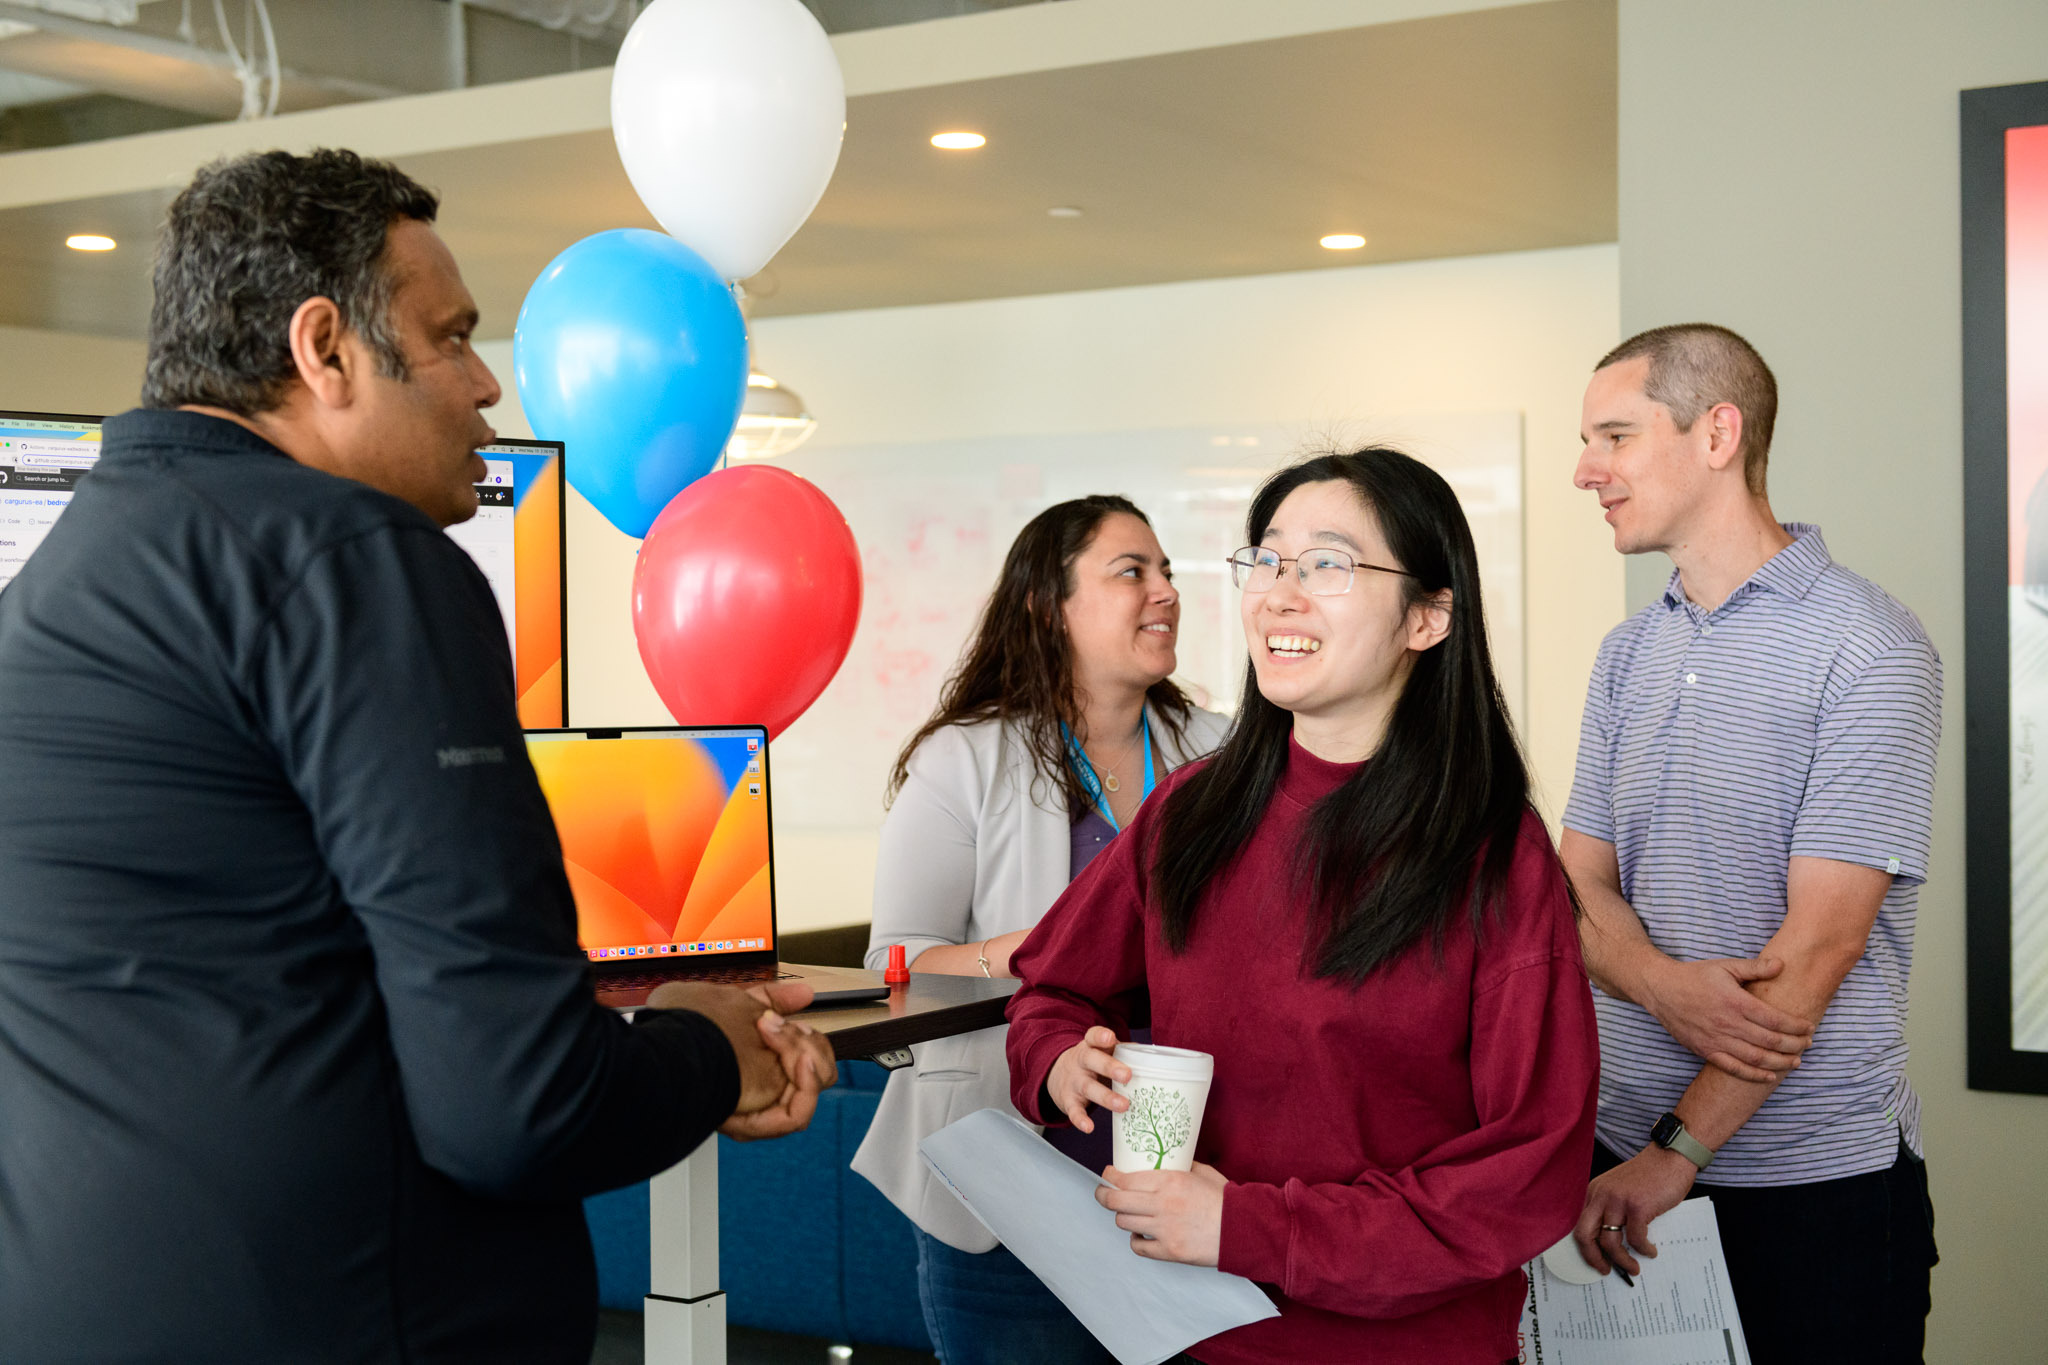 Candid photo of man talking to smiling woman next to computer screens with balloons and colleagues behind her.